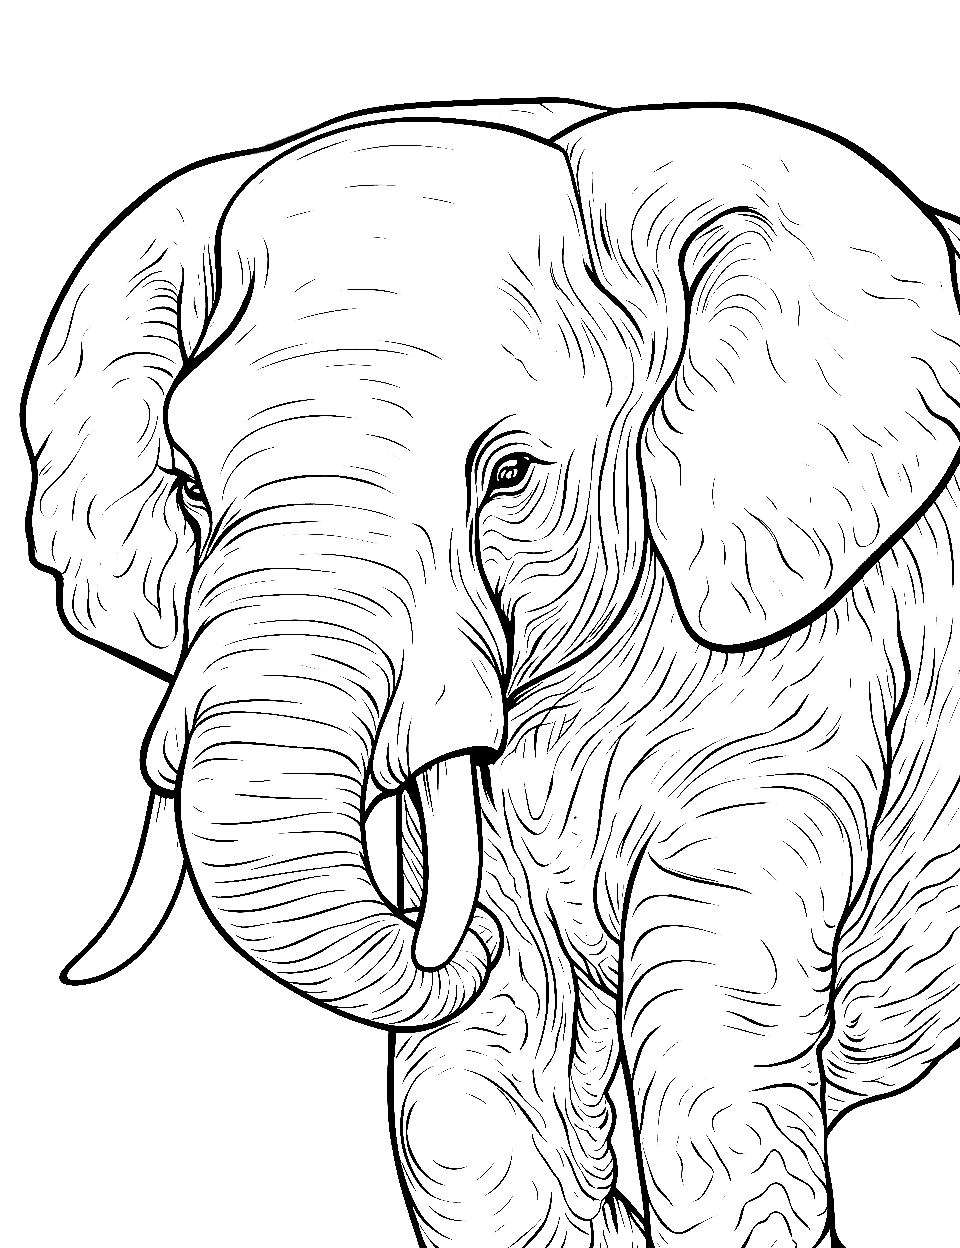 Mud Elephant: Over 145 Royalty-Free Licensable Stock Illustrations &  Drawings | Shutterstock